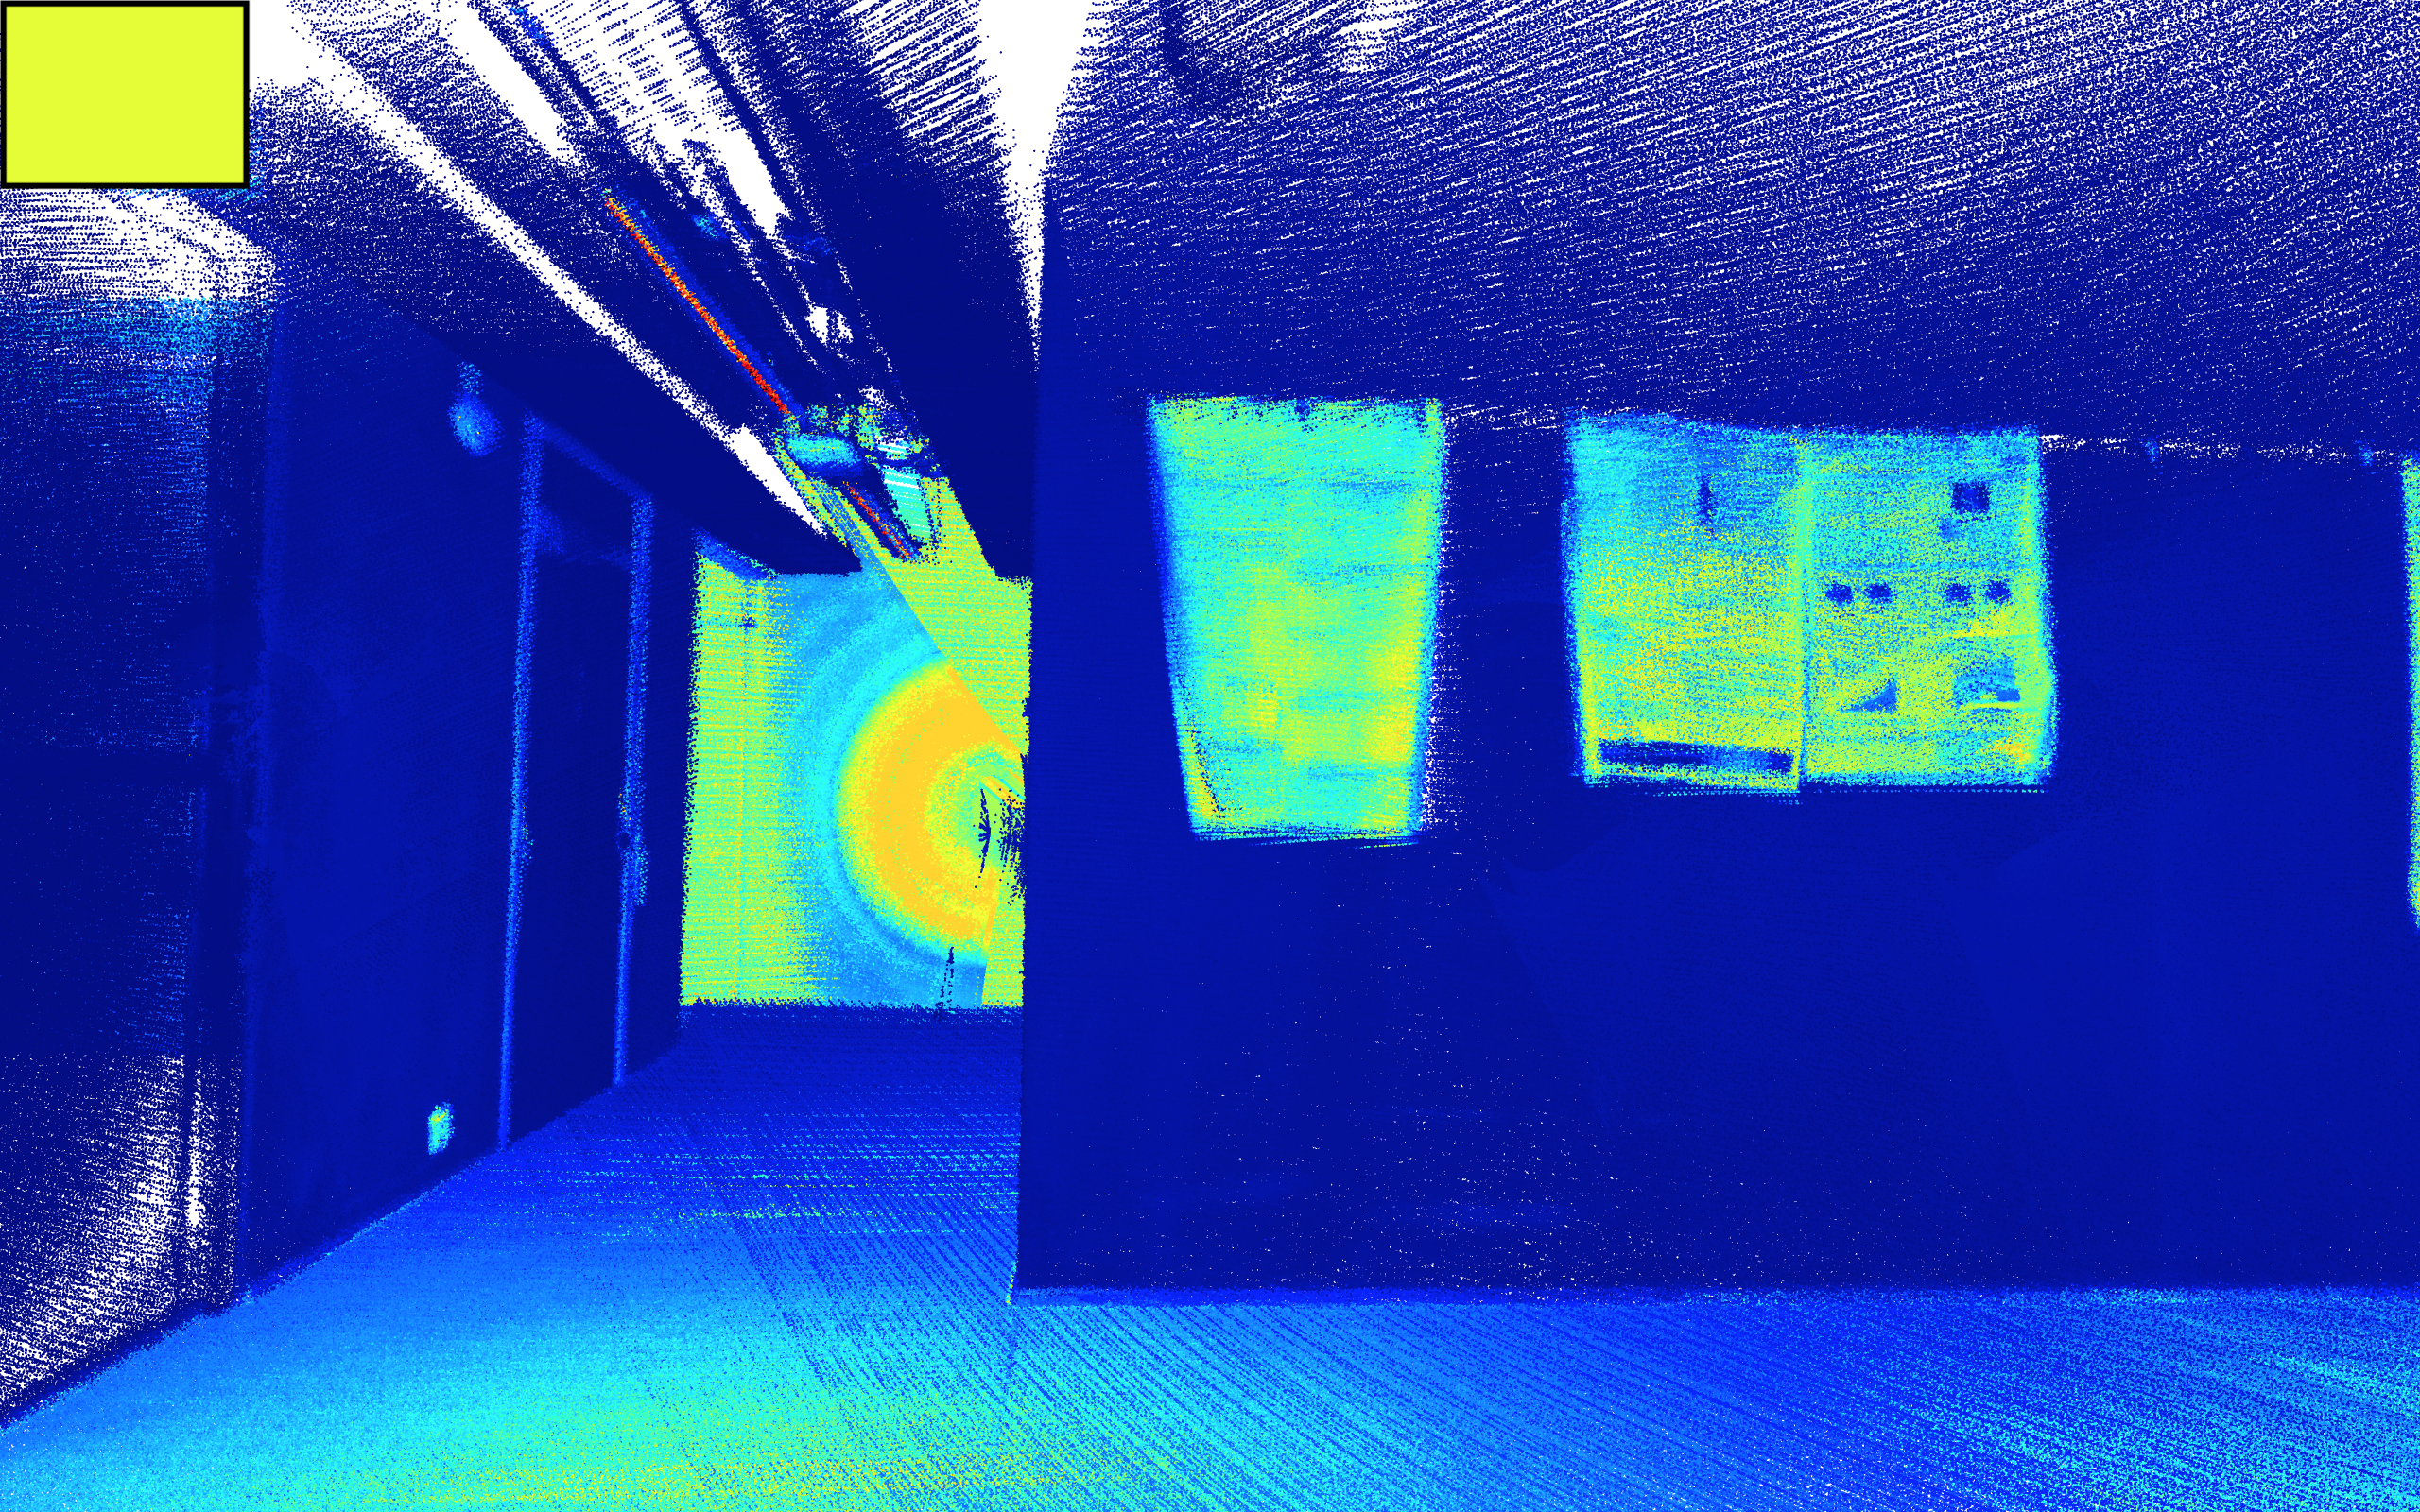 Hallway viewpoint 2 - point cloud